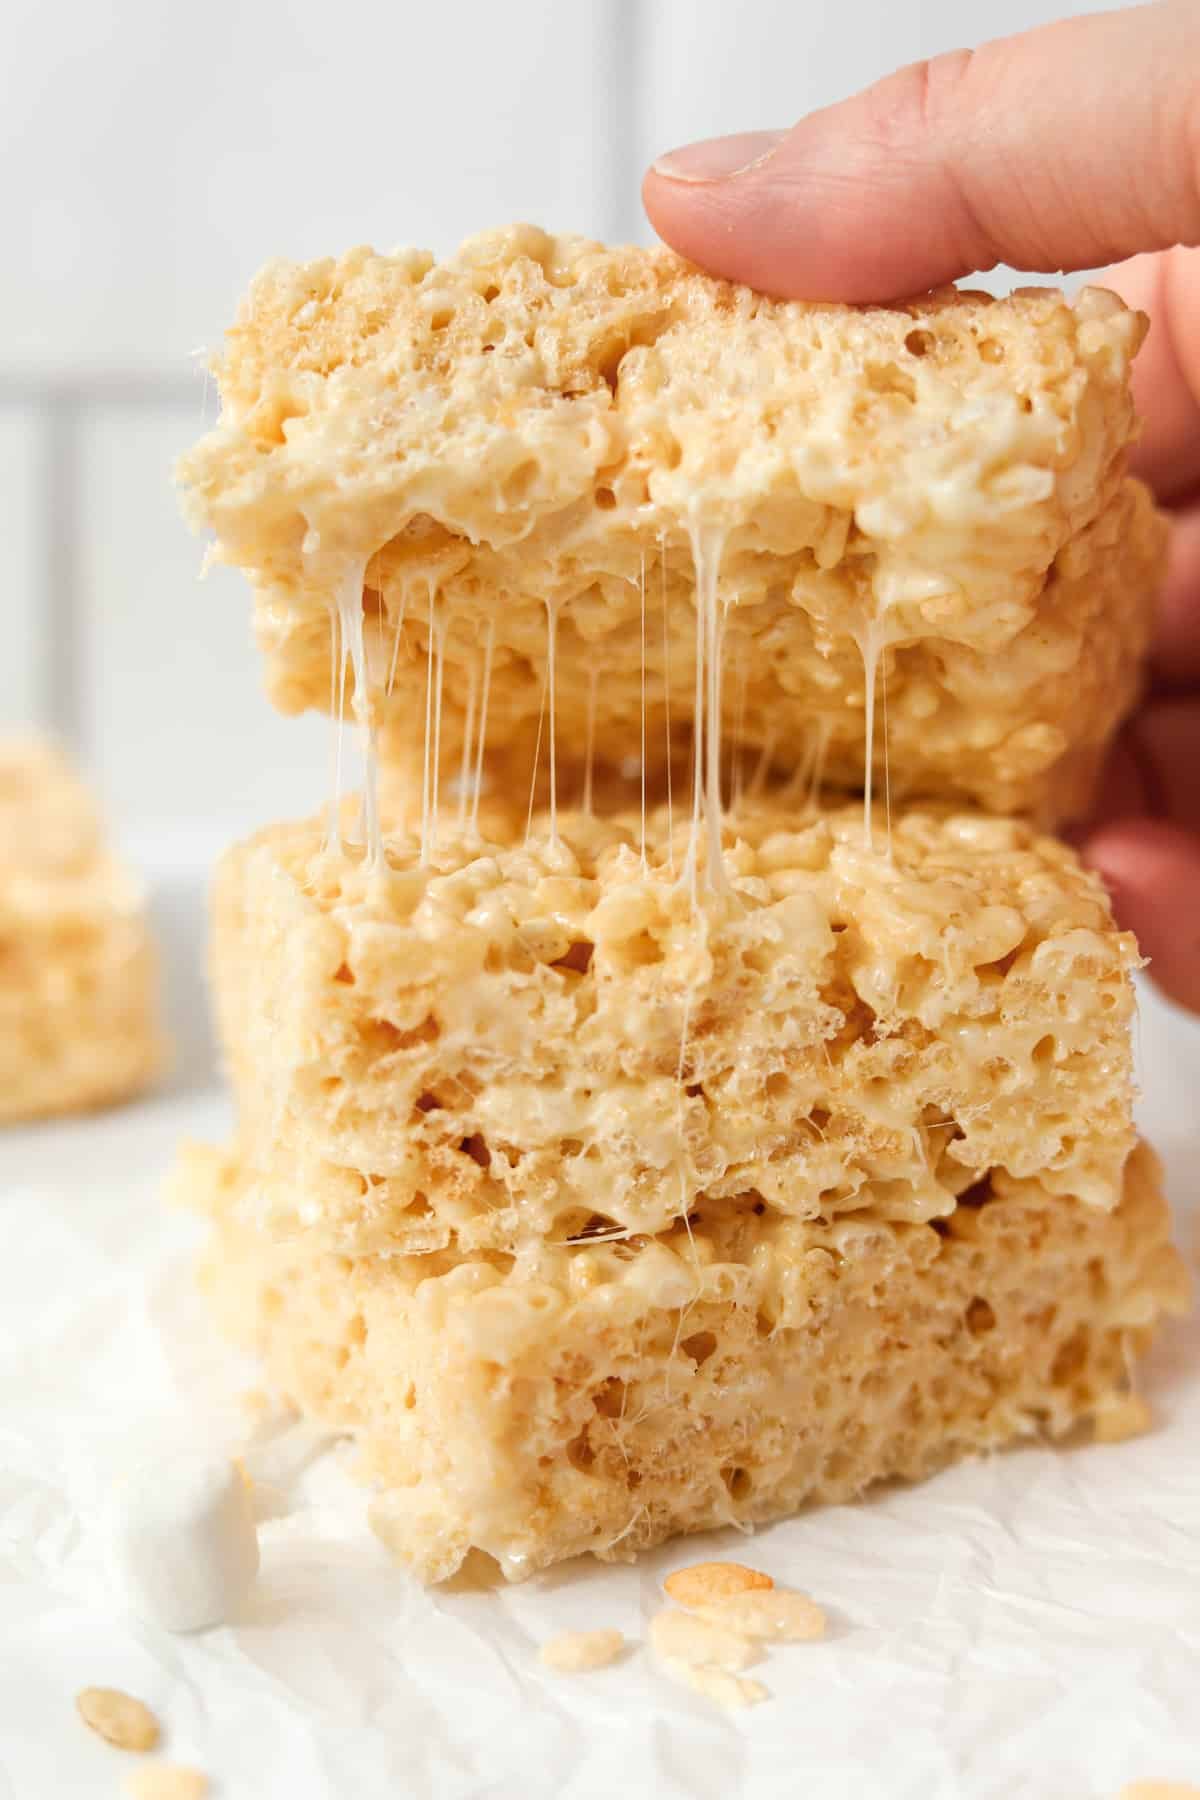 A stack of rice krispie treats being pulled apart, showing the gooey marshmallows.